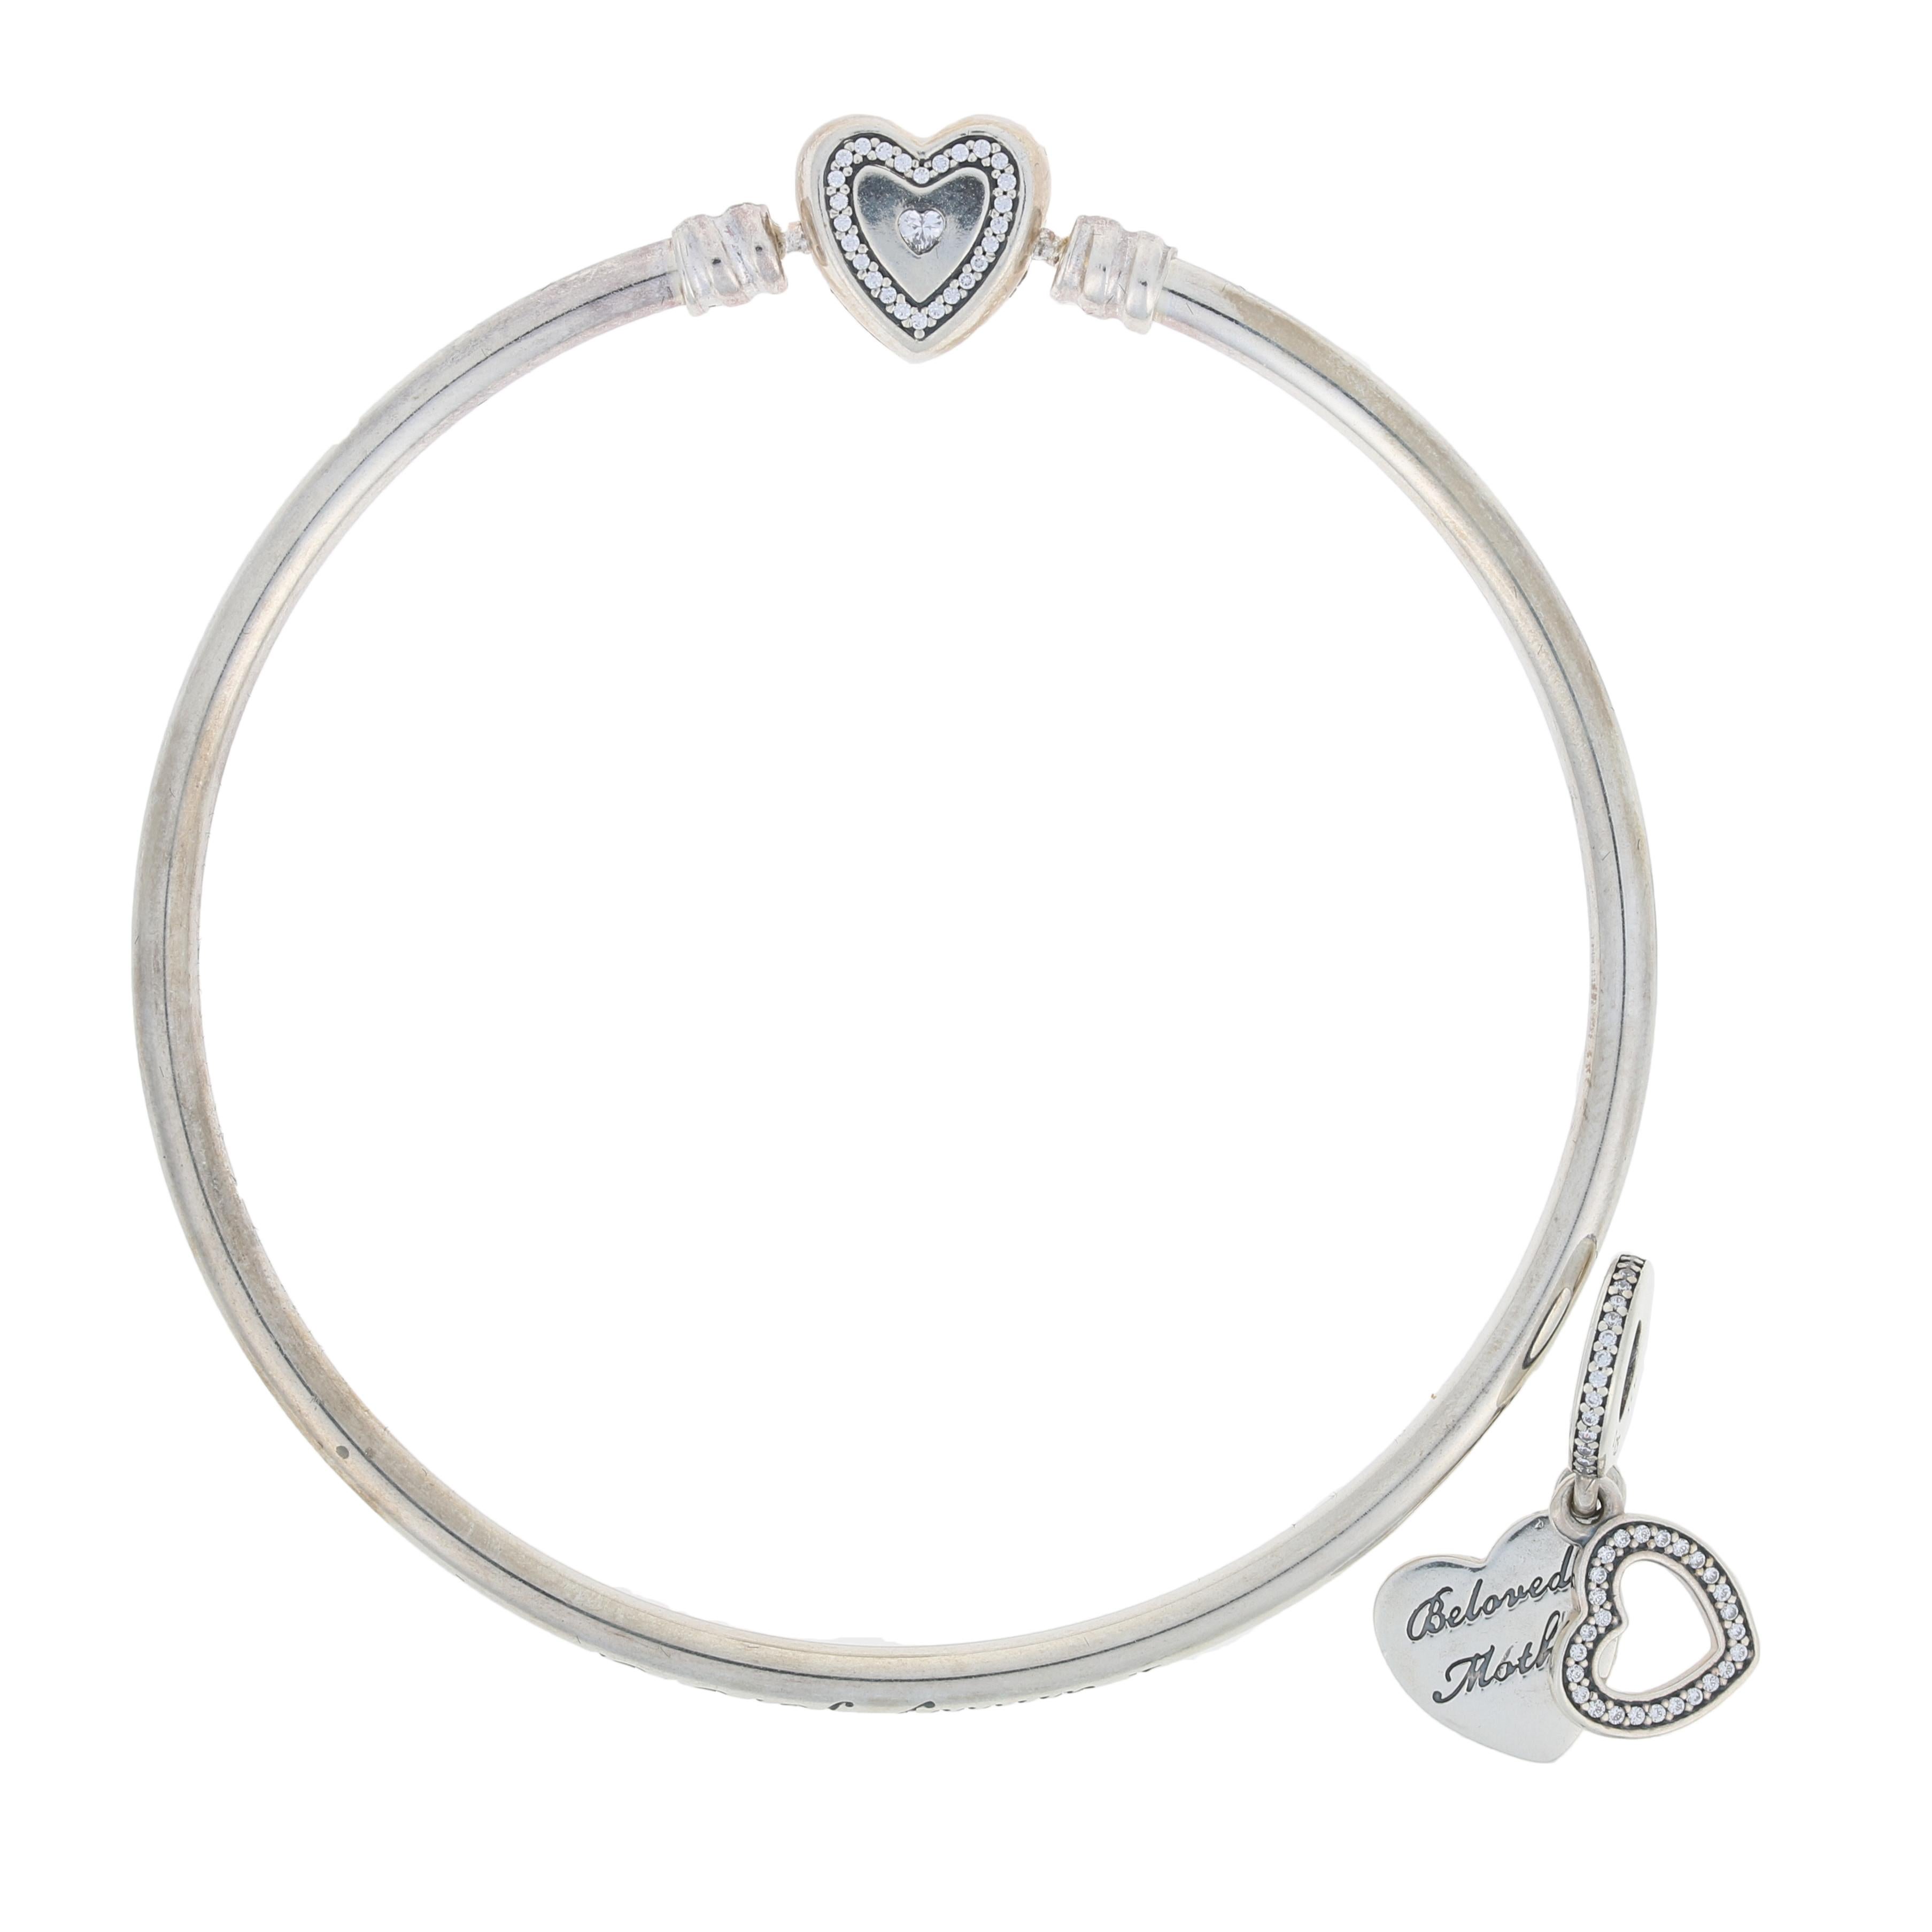 This NEW piece is guaranteed 100% authentic PANDORA, as we recently bought out an authorized PANDORA retailer.

Brand: Pandora
Number: USB7961-17
Title: A Mother's Love Gift Set  

Metal Content: Sterling Silver

Stone Info: Clear Cubic